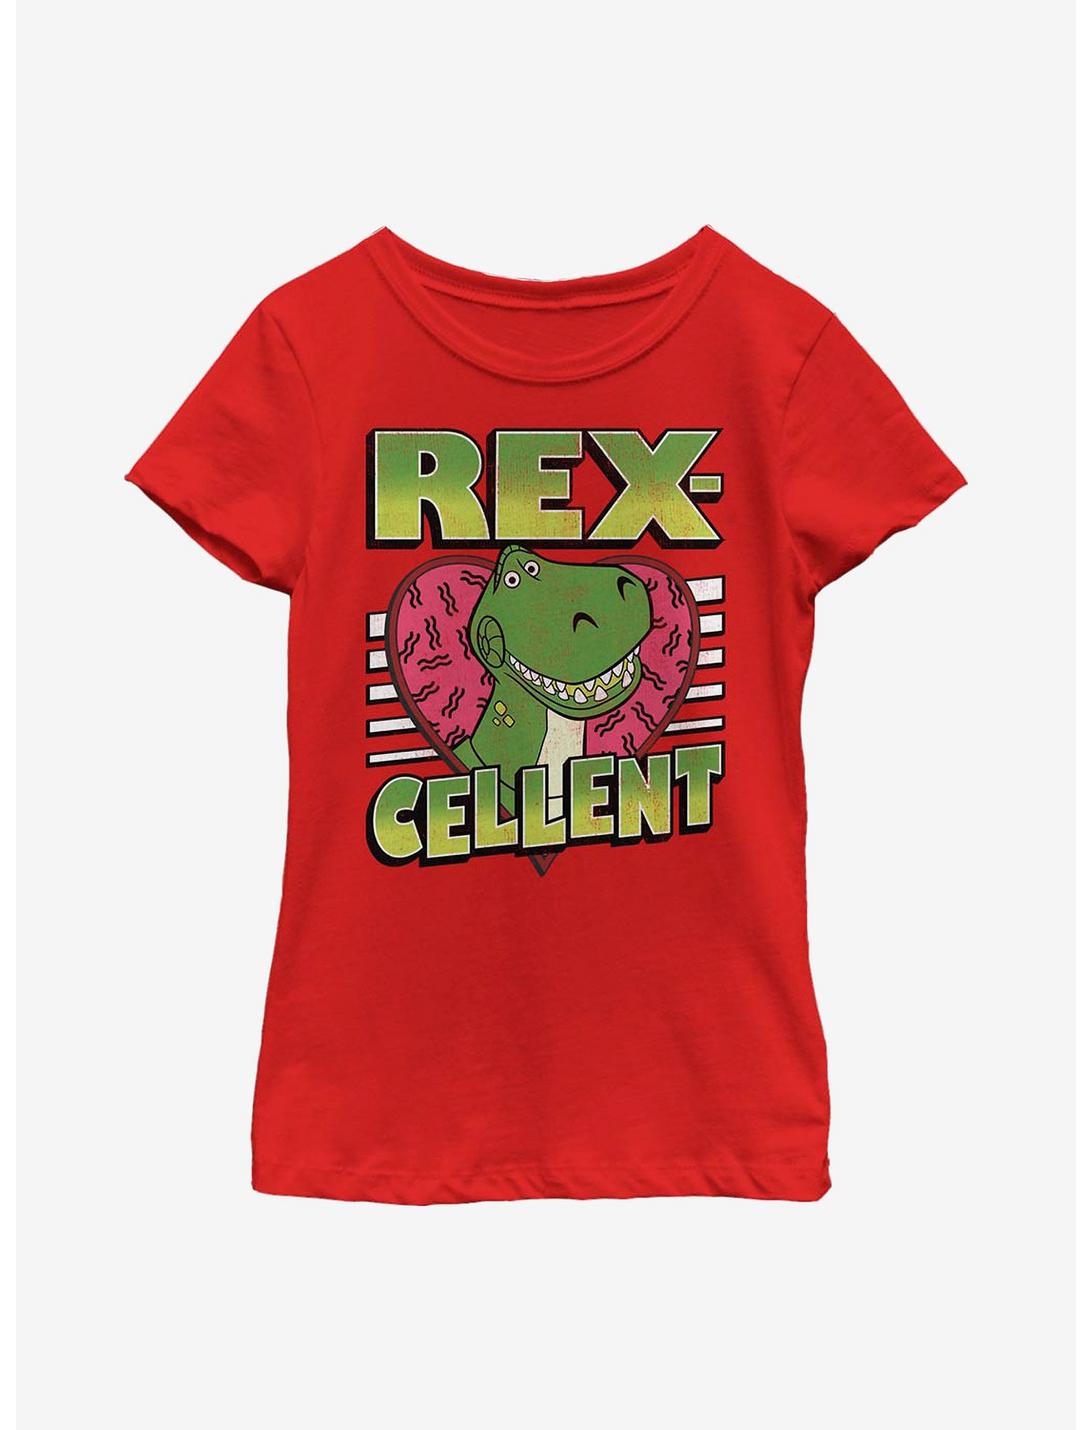 Disney Pixar Toy Story Rexcellent Heart Youth Girls T-Shirt, RED, hi-res